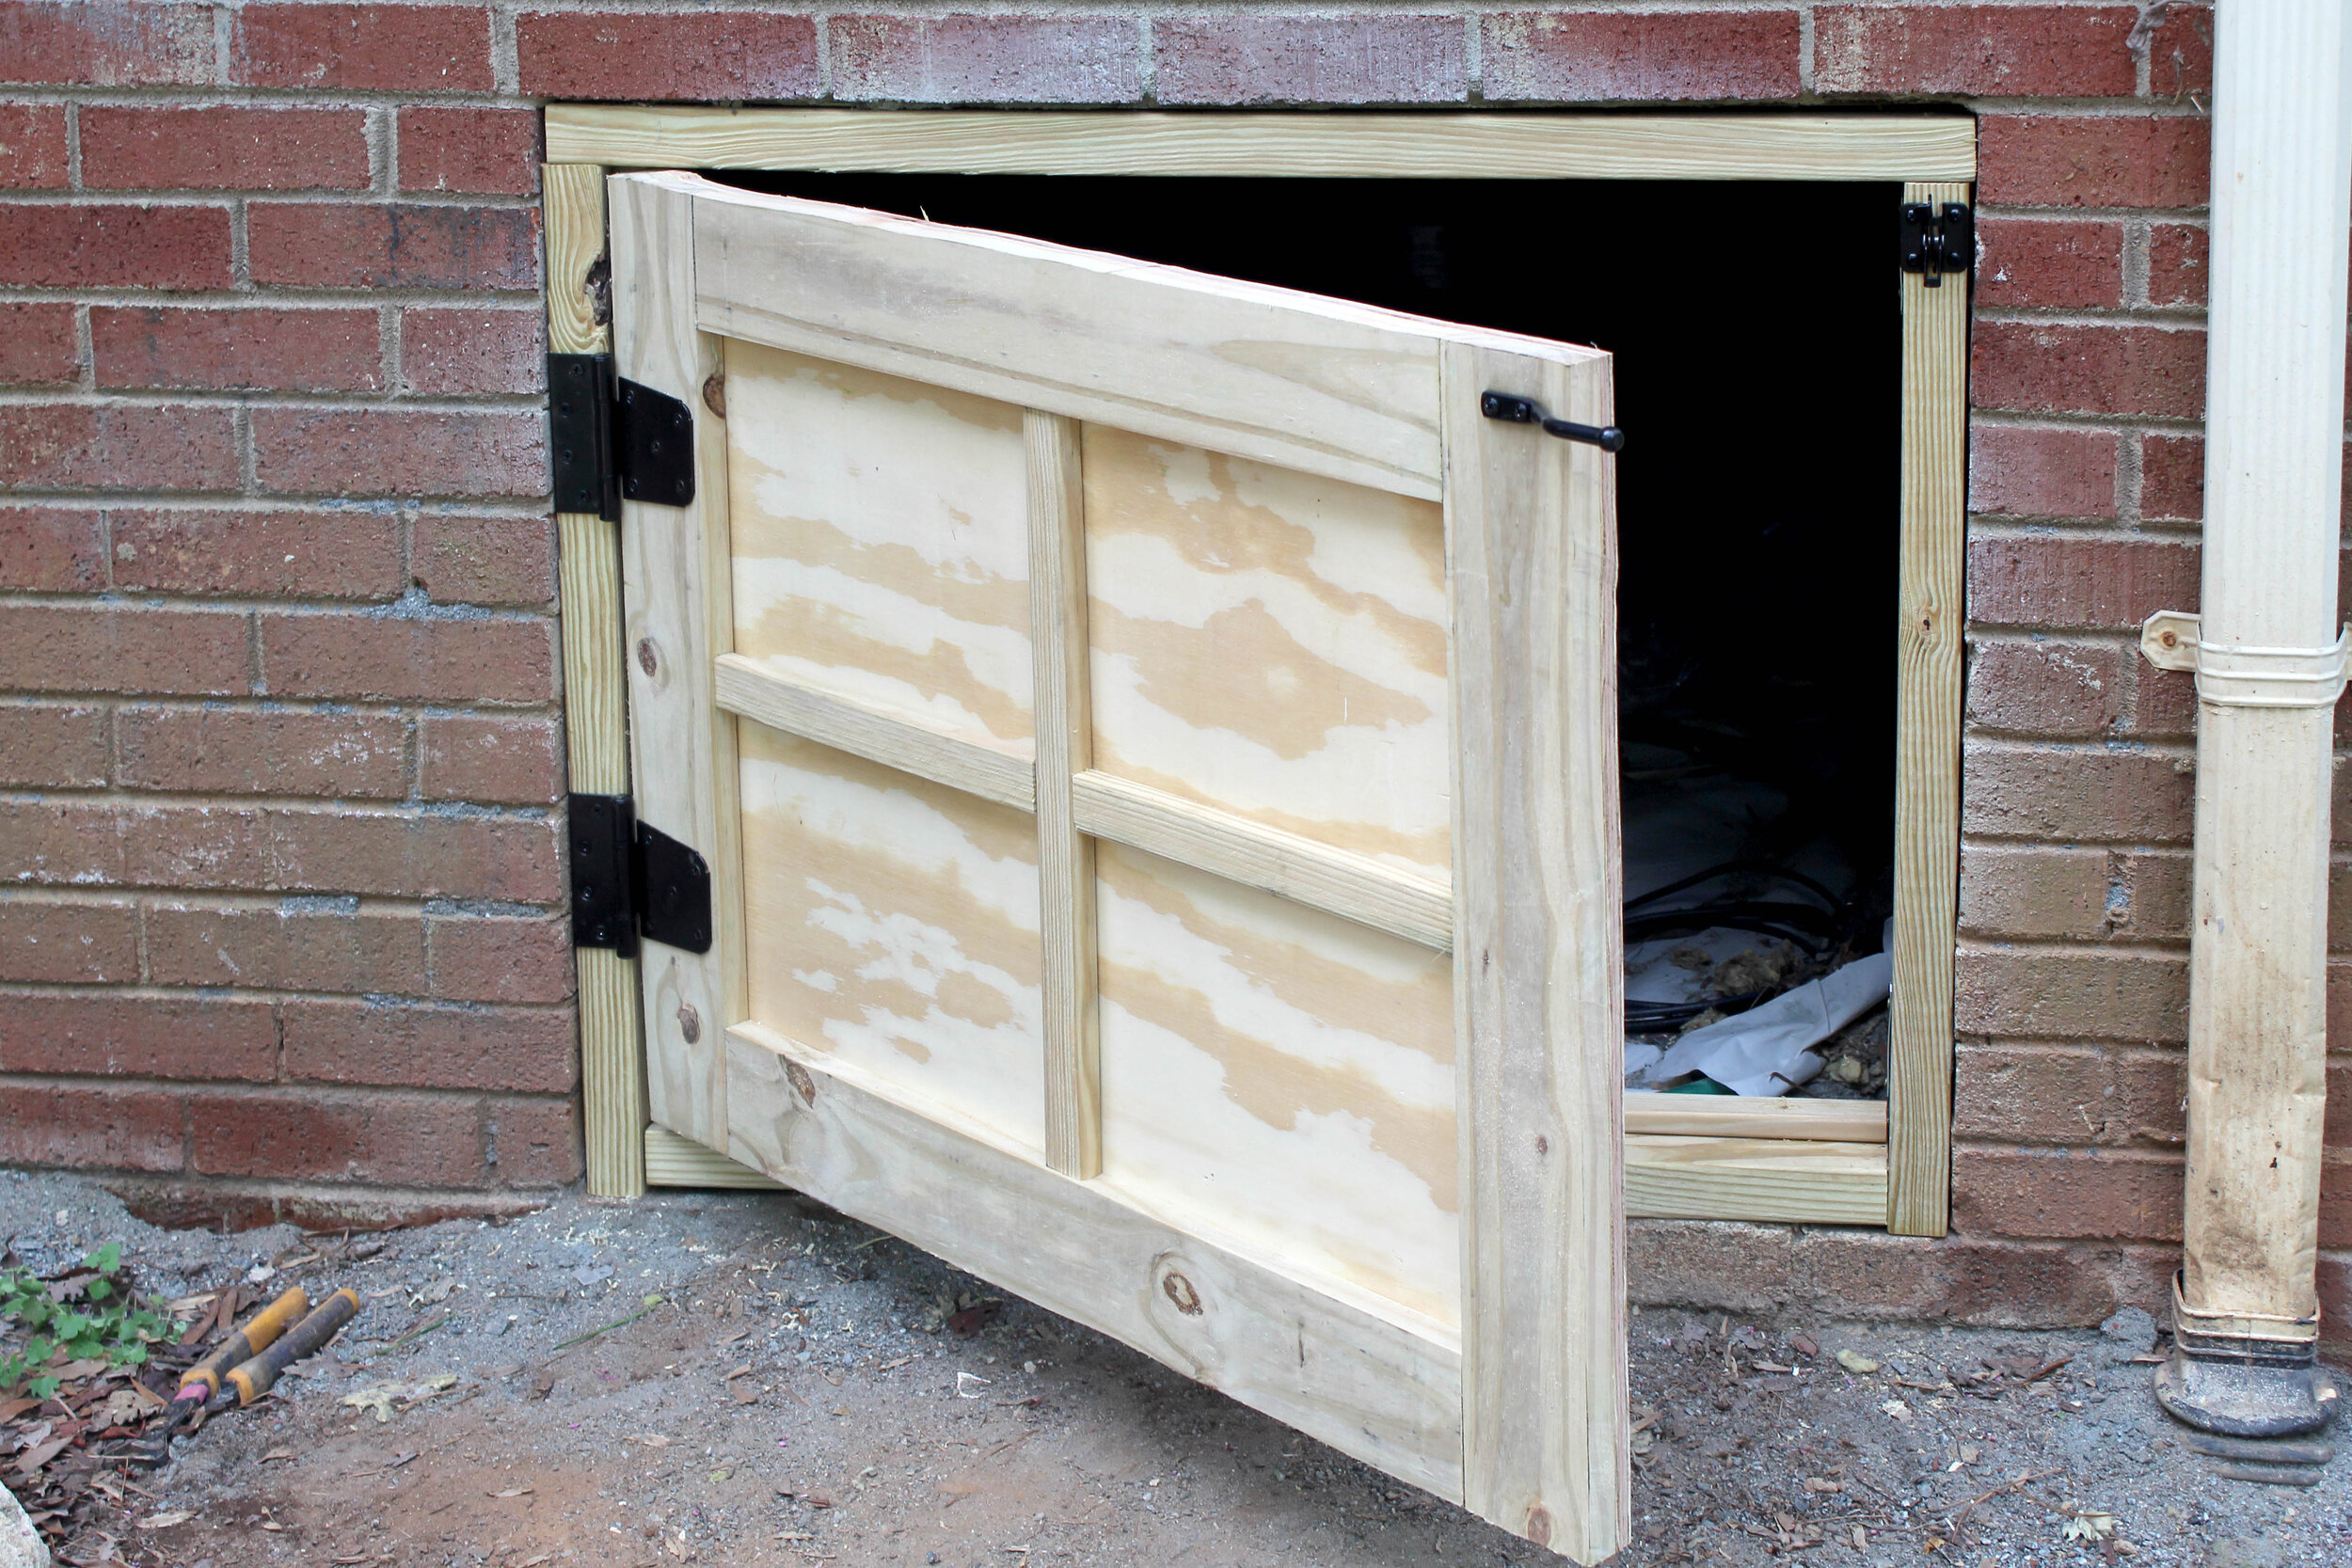 What to Consider When Selecting a Crawl Space Door